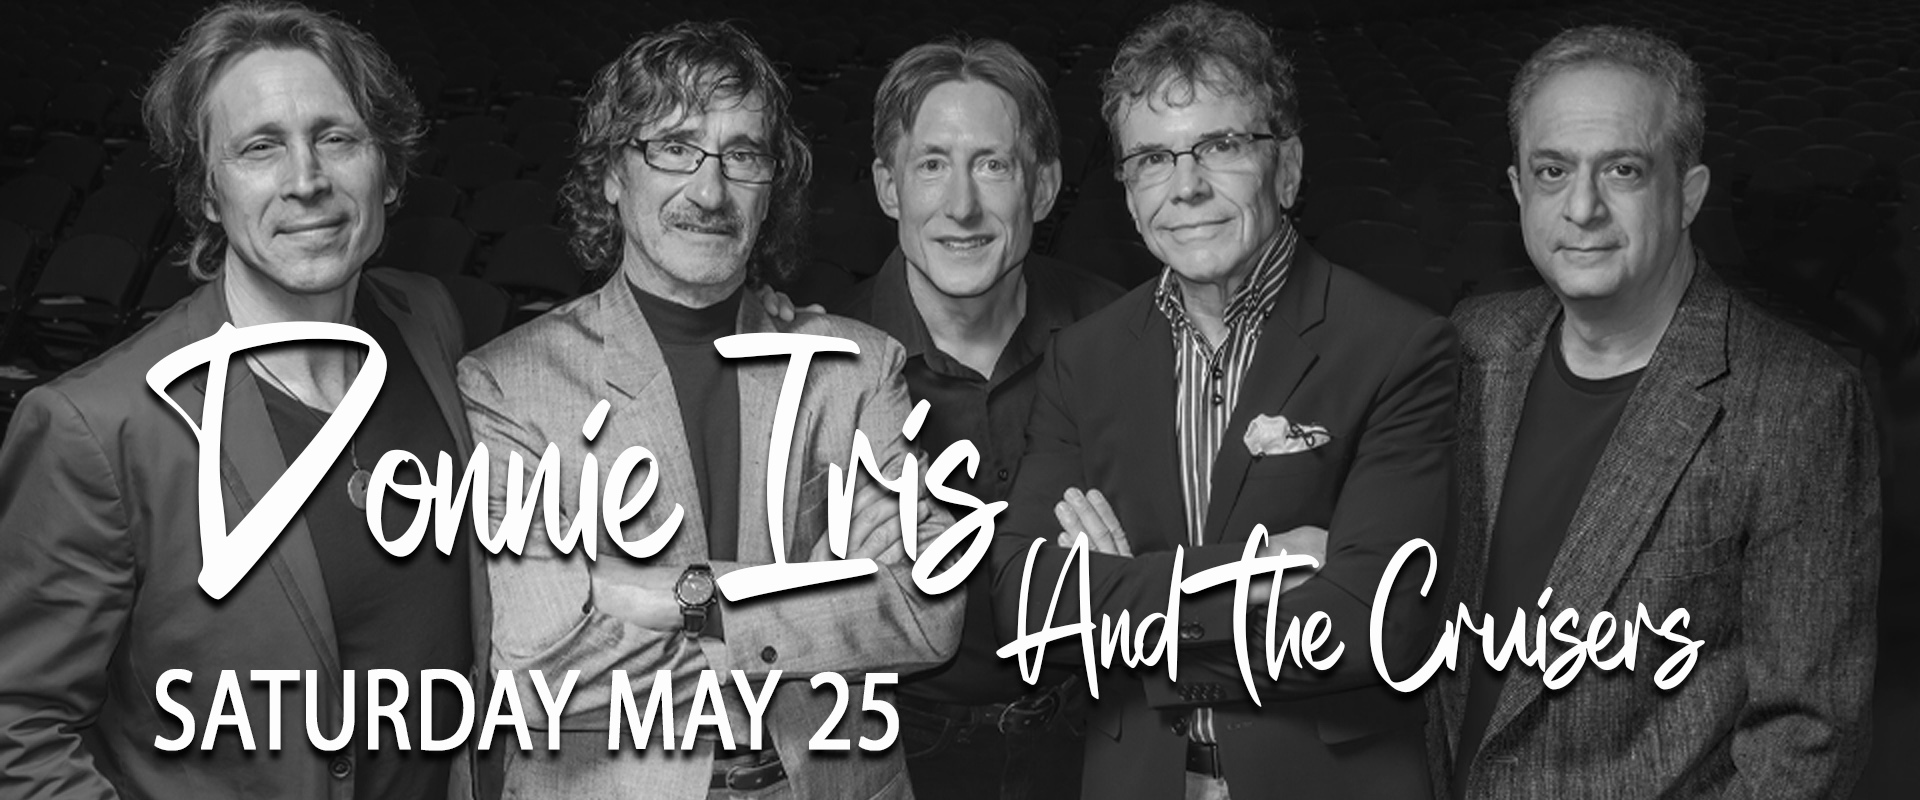 Donnie Iris and The Cruisers at Warner Theatre